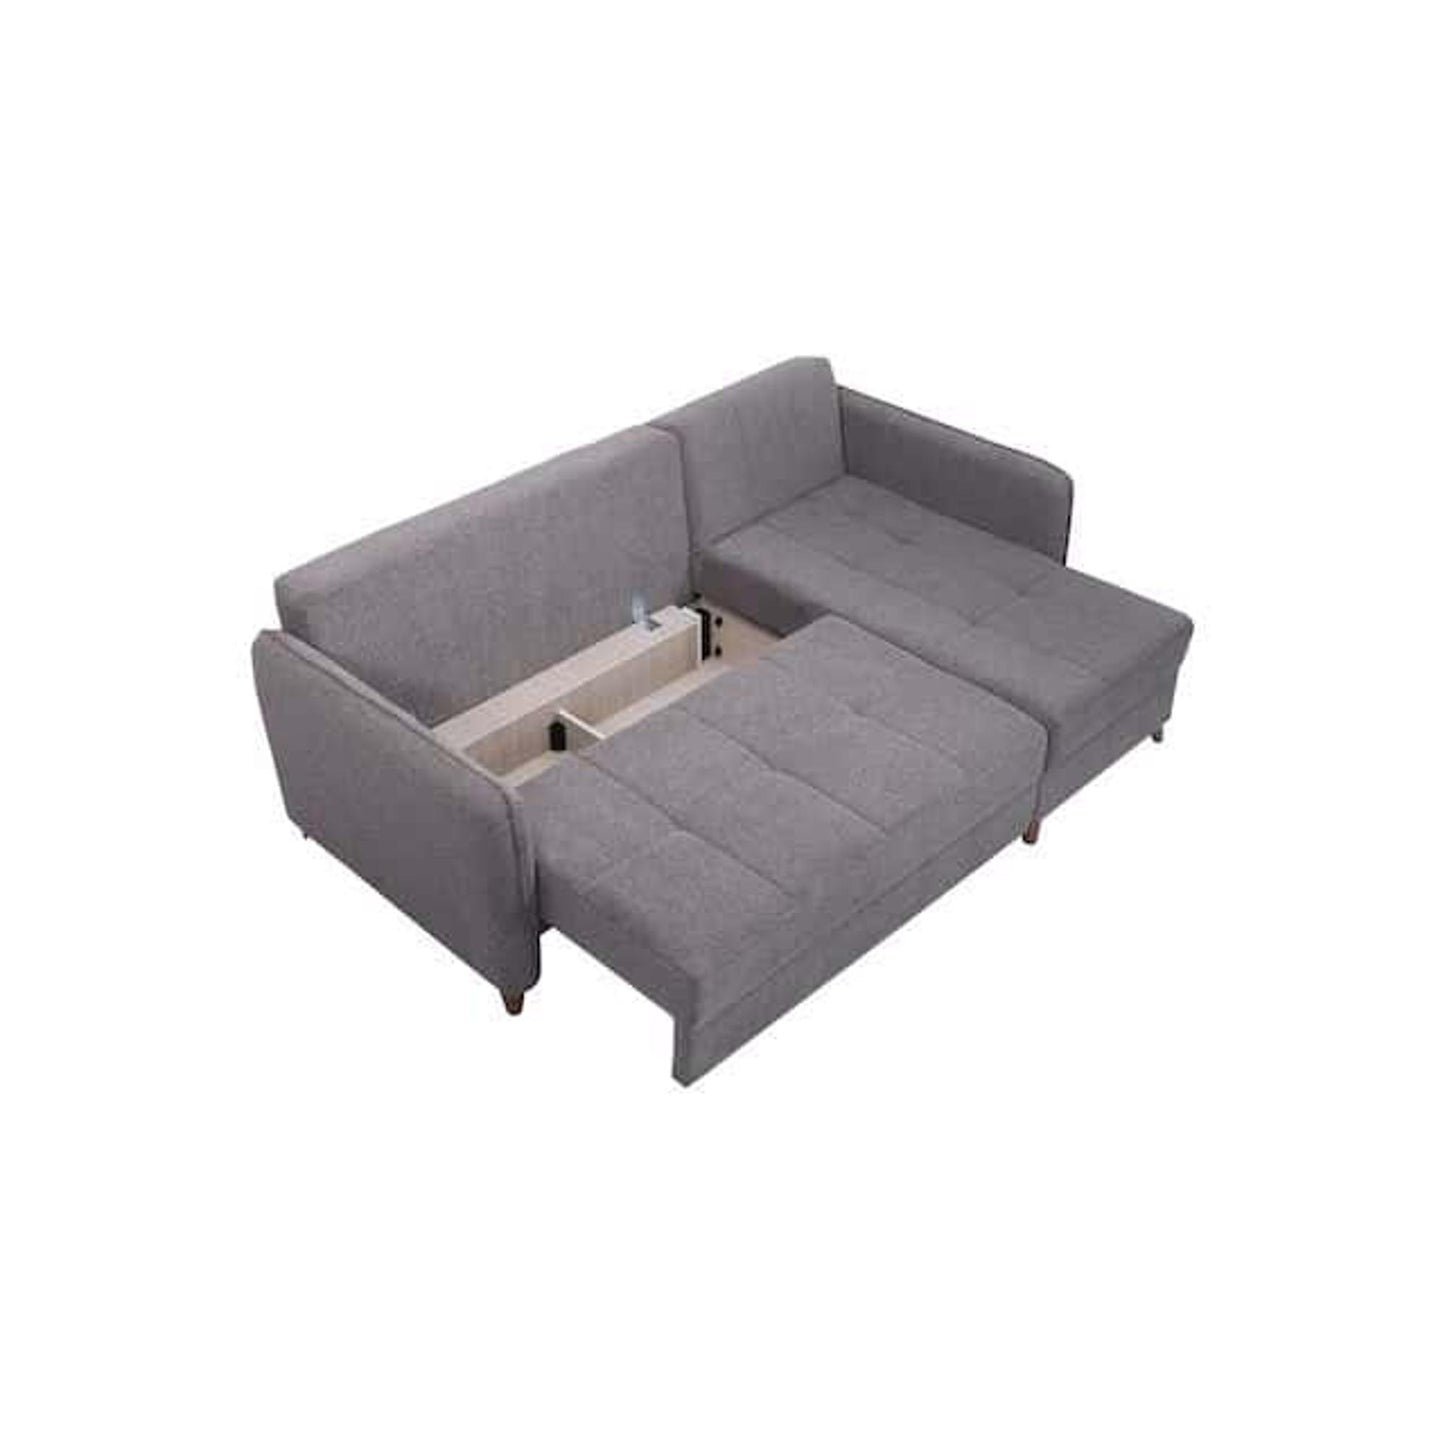 Brooklyn Sectional Sofa in Gray Chenille Fabric